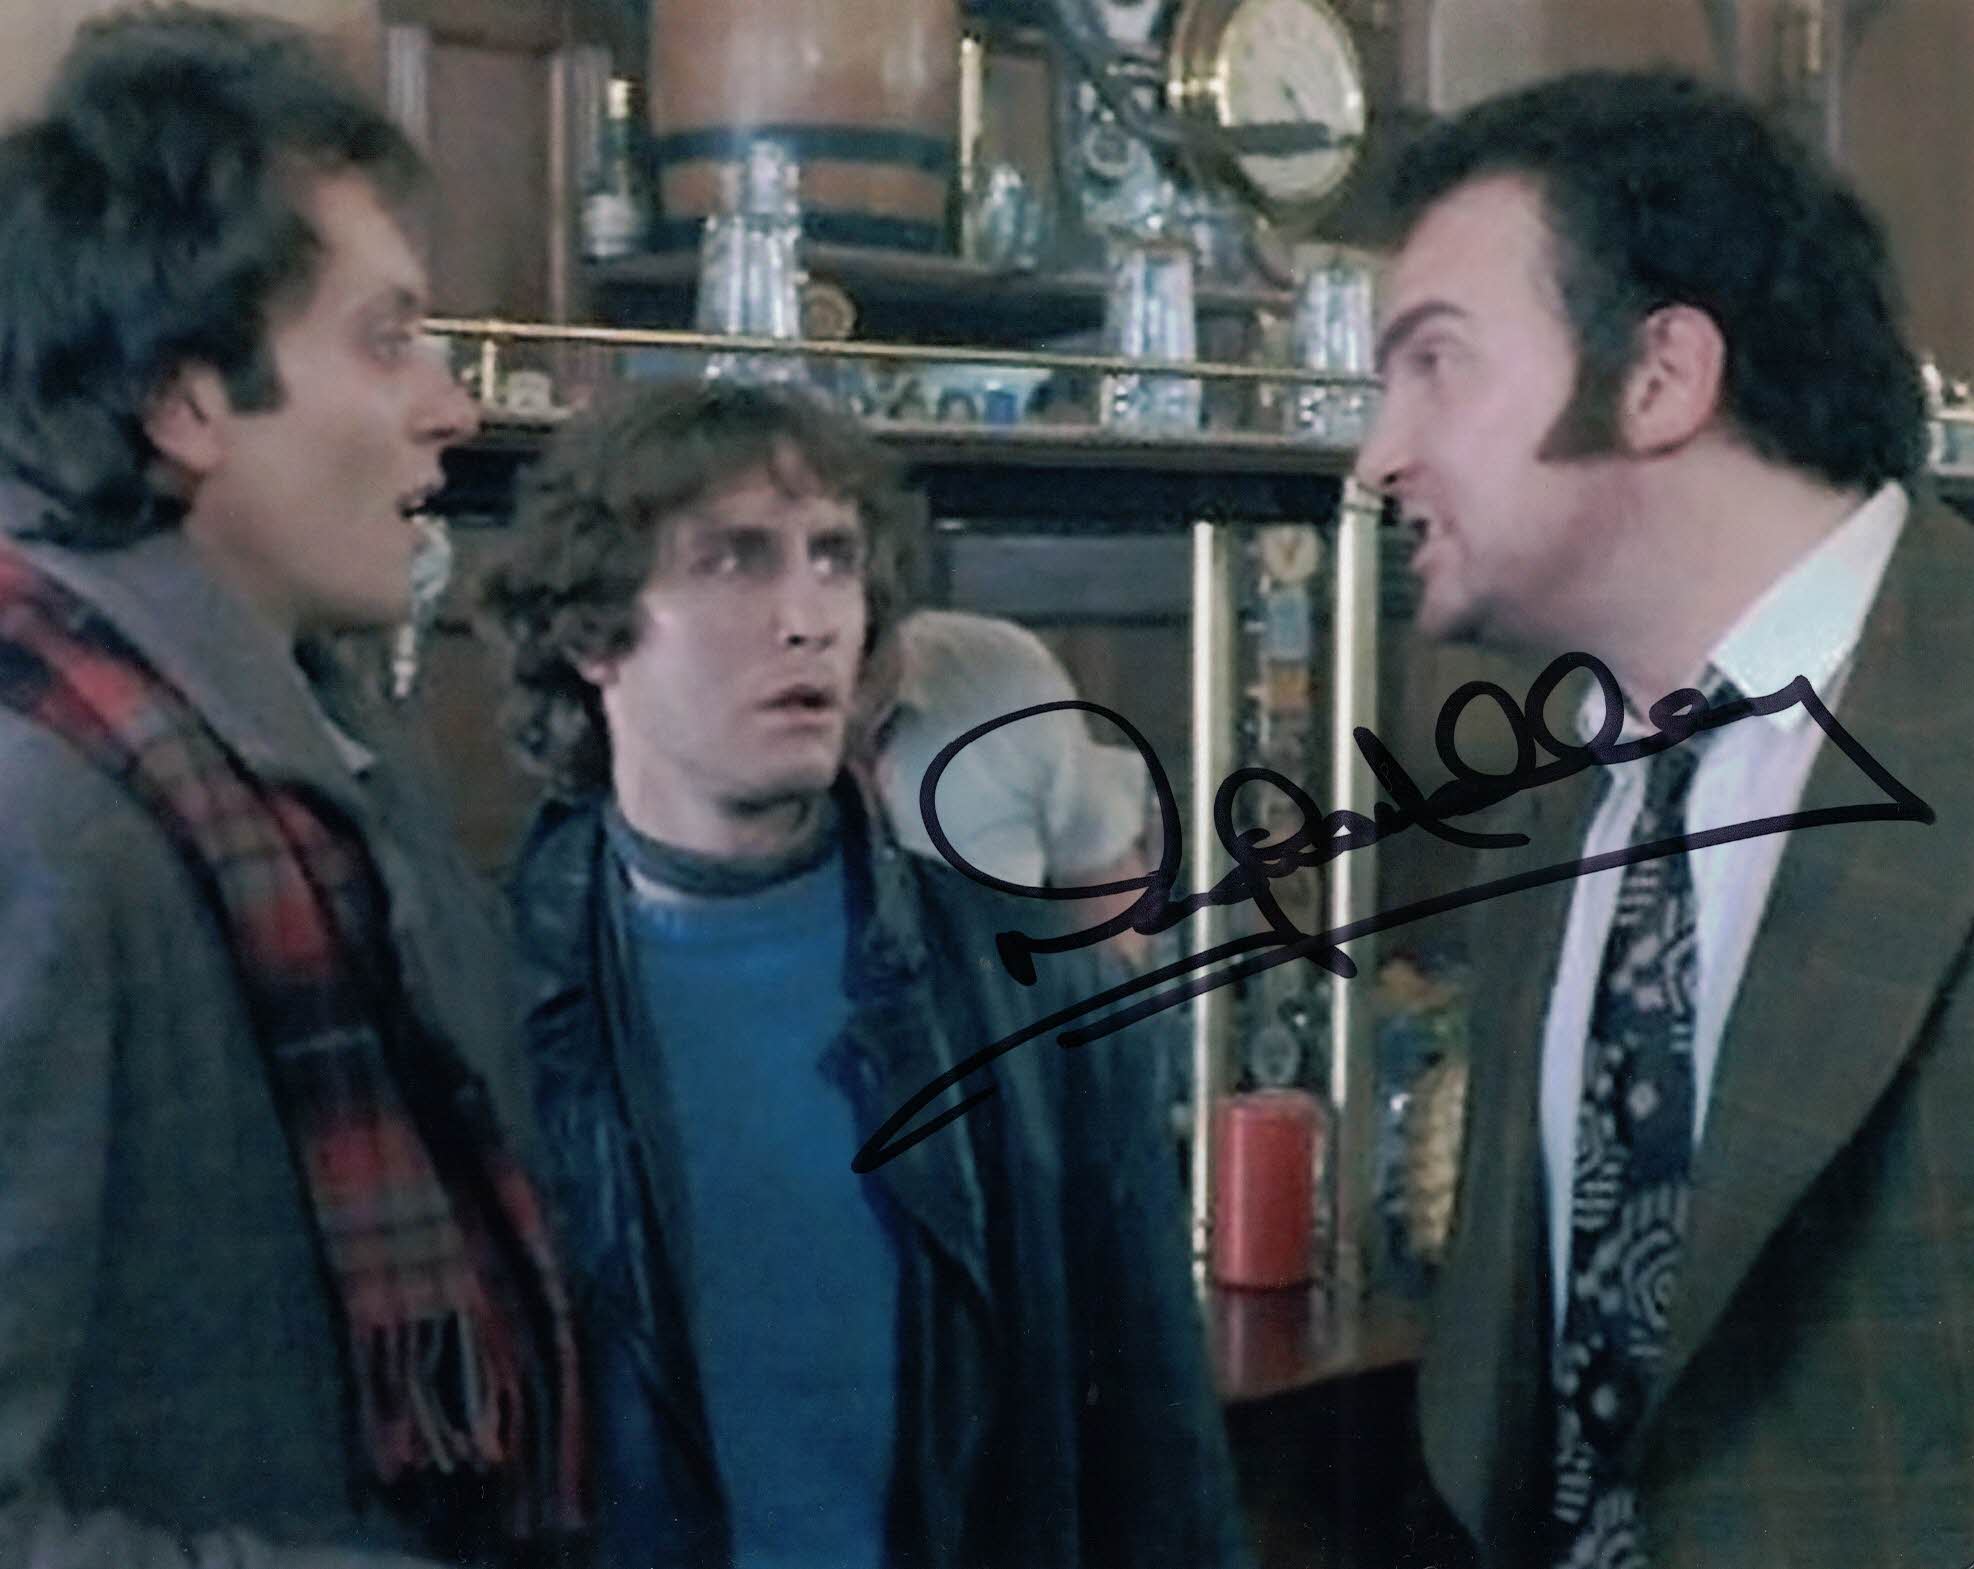 DARAGH O' MALLEY - Irishman in Withnail & I - hand signed 10 x 8 photo